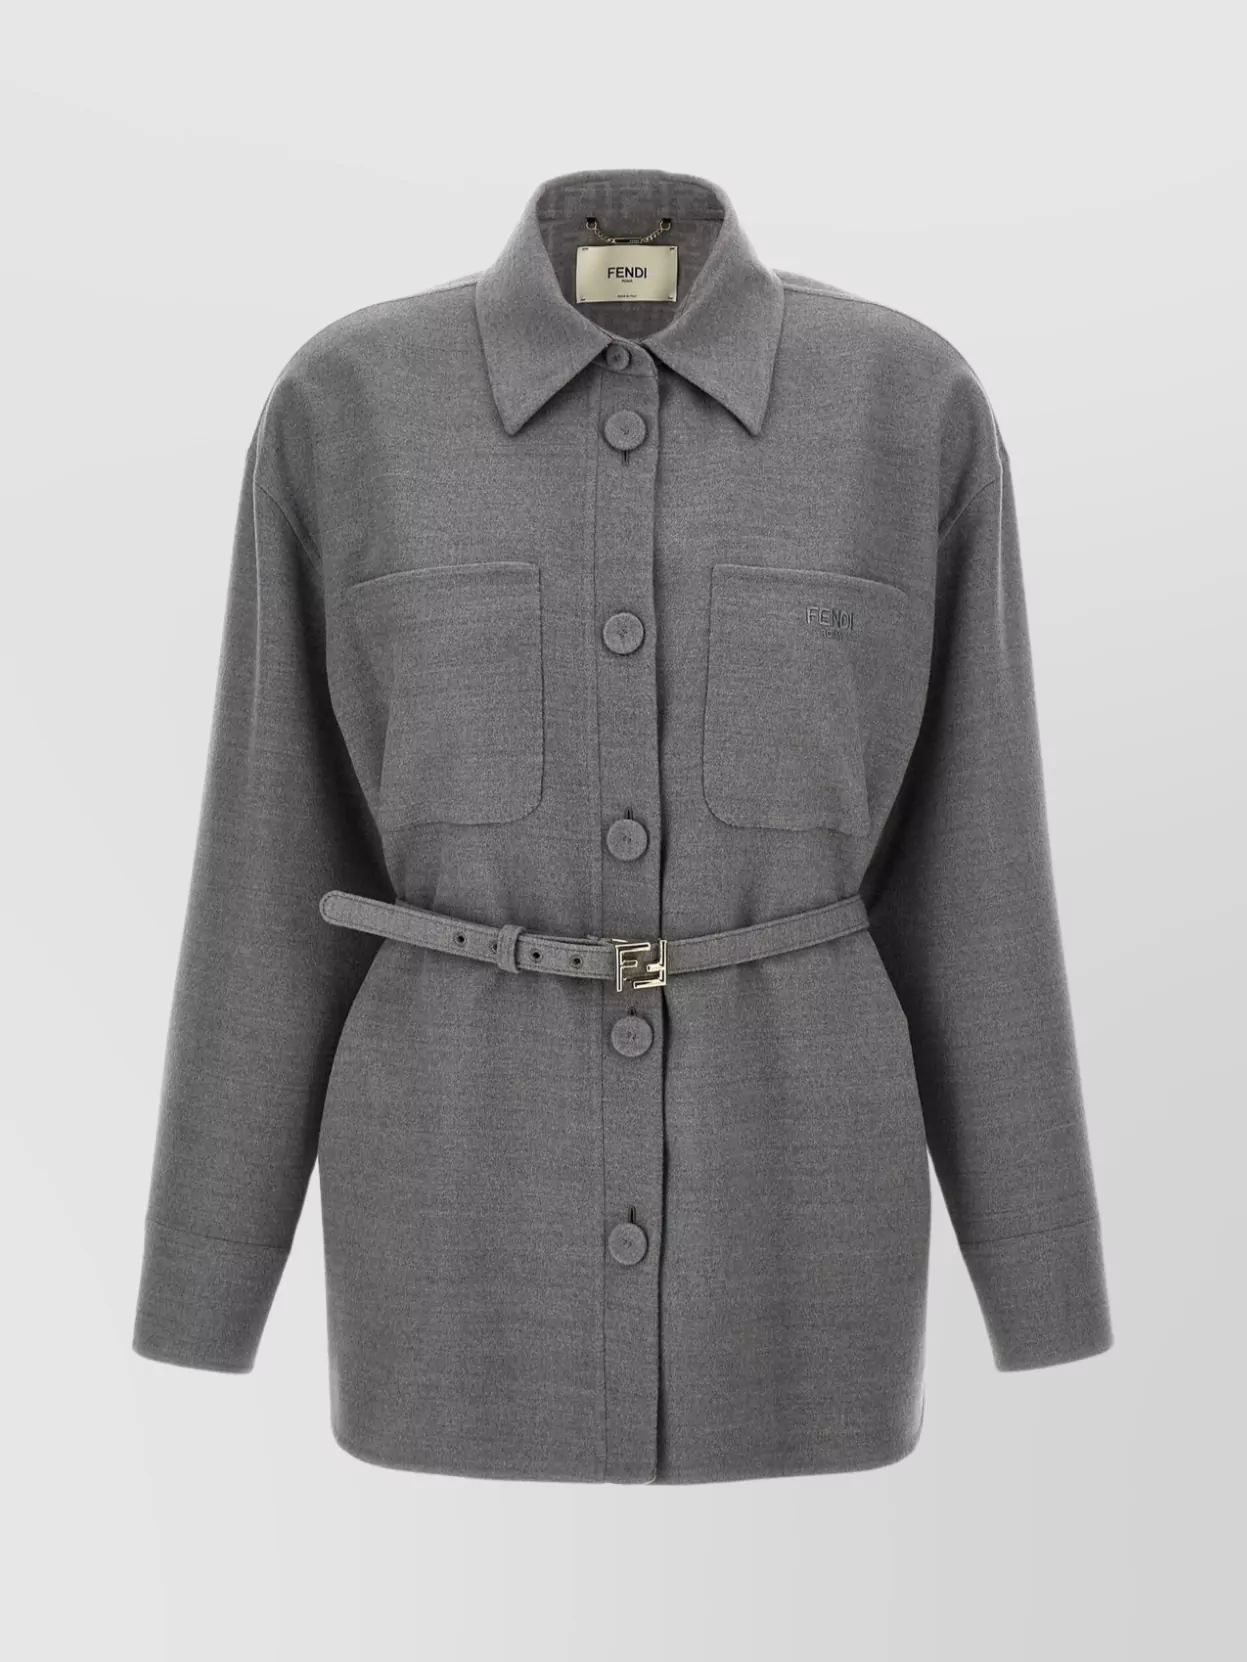 Fendi Belted Collared Jacket With Front Pockets In Gray